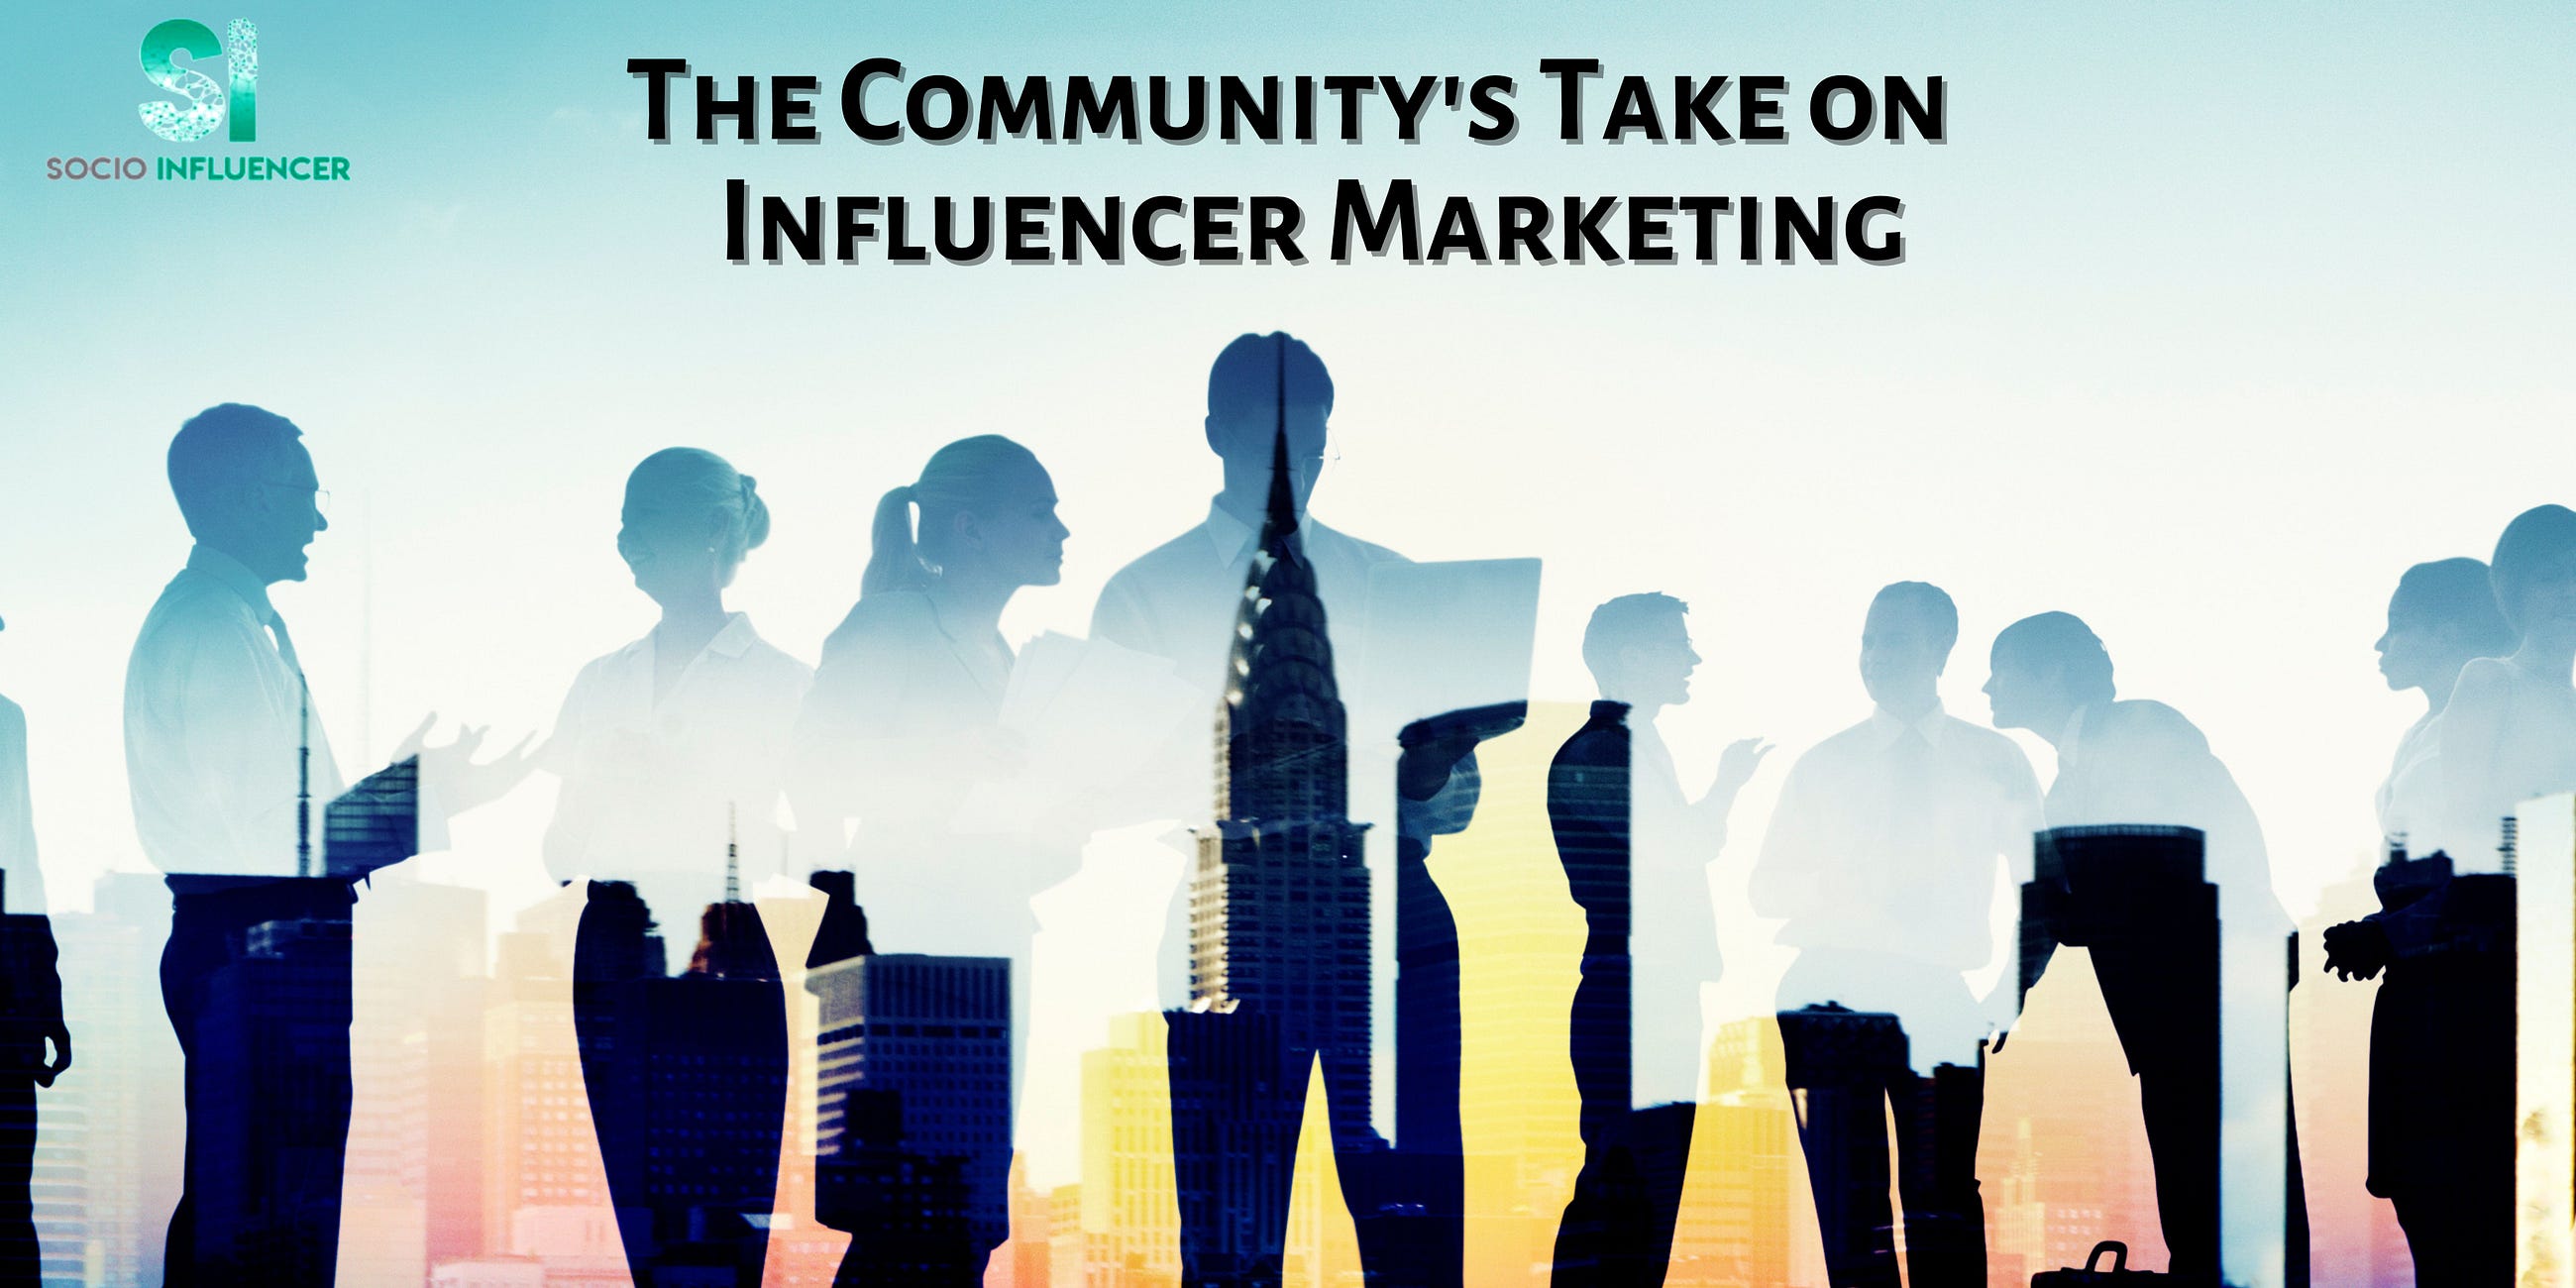 The Community’s Take on Influencer Marketing — What Do They Think?